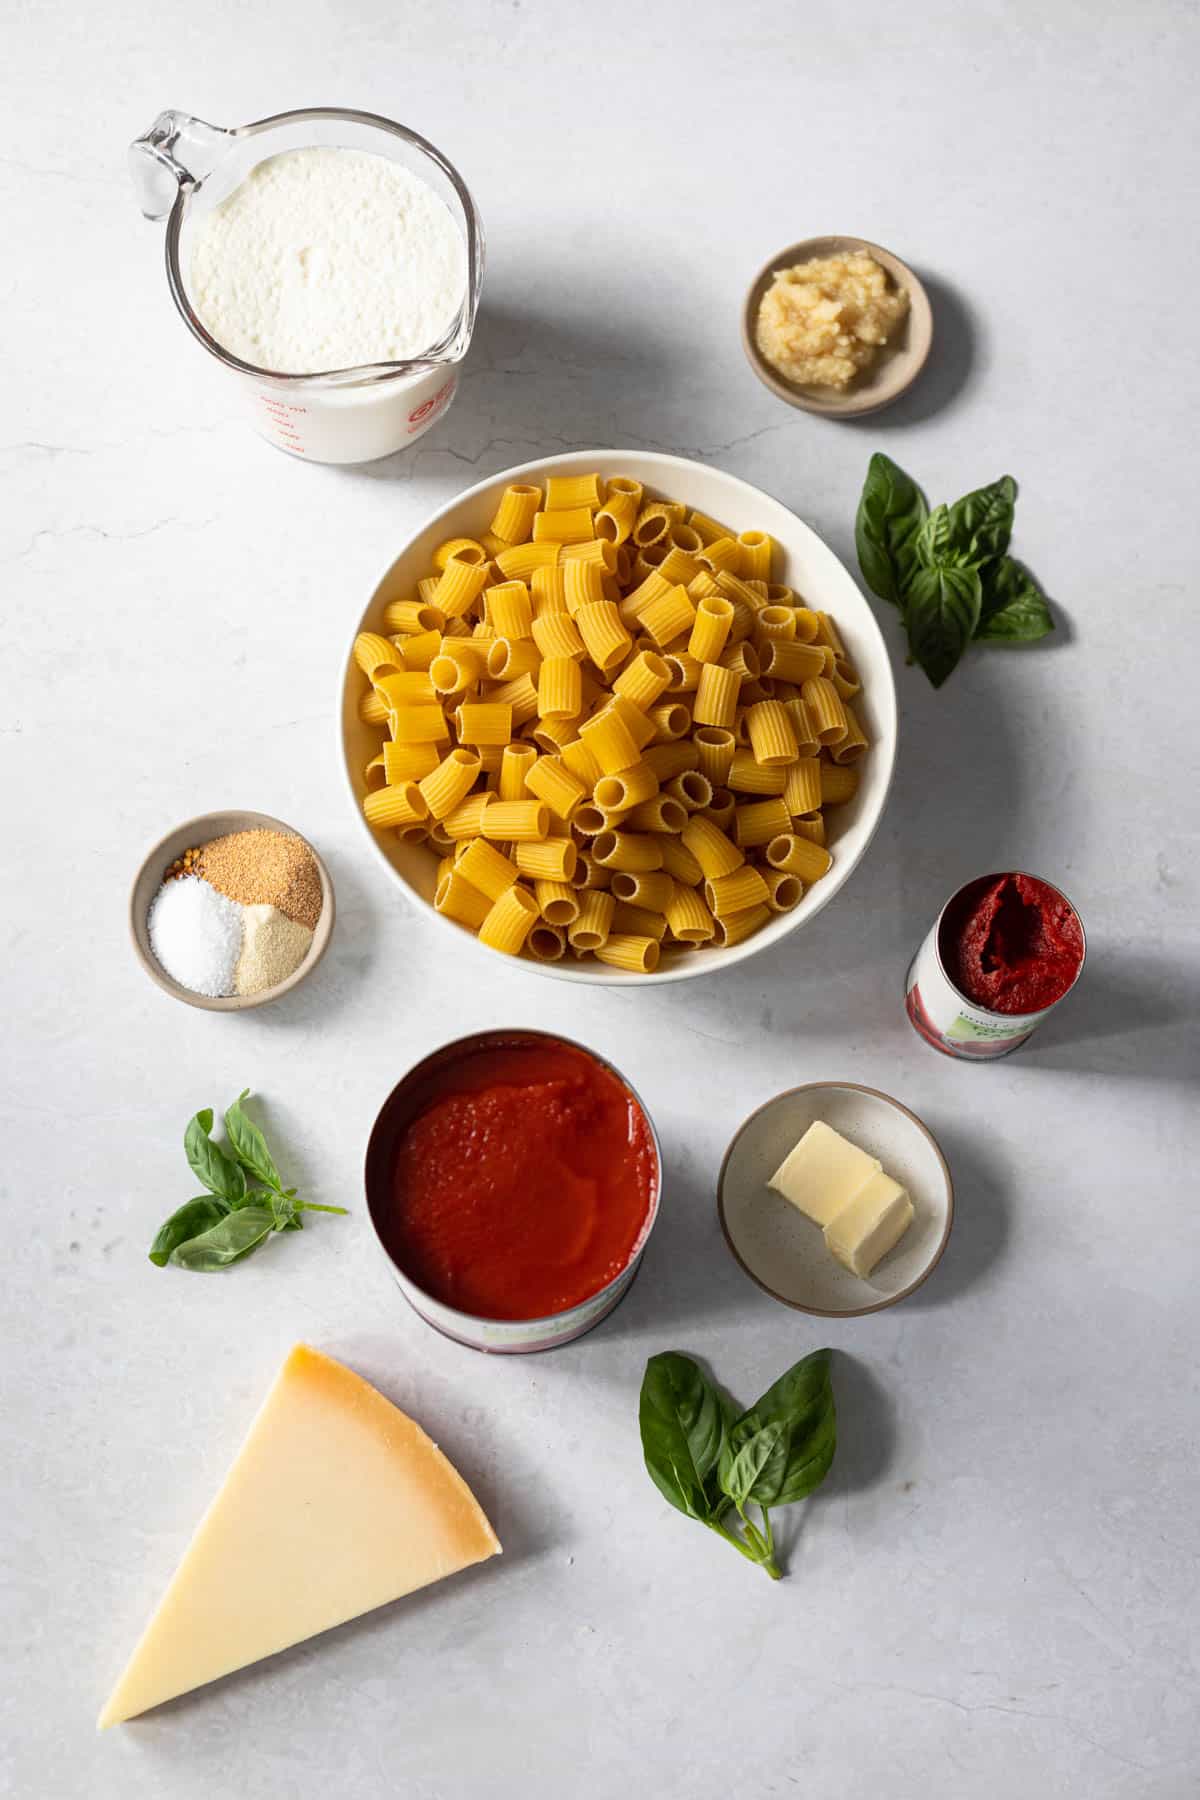 ingredients for pink sauce pasta - heavy cream, crushed garlic, fresh basil, tomato paste, unsalted butter, tomato puree, parmesan cheese, garlic and onion powder, salt.